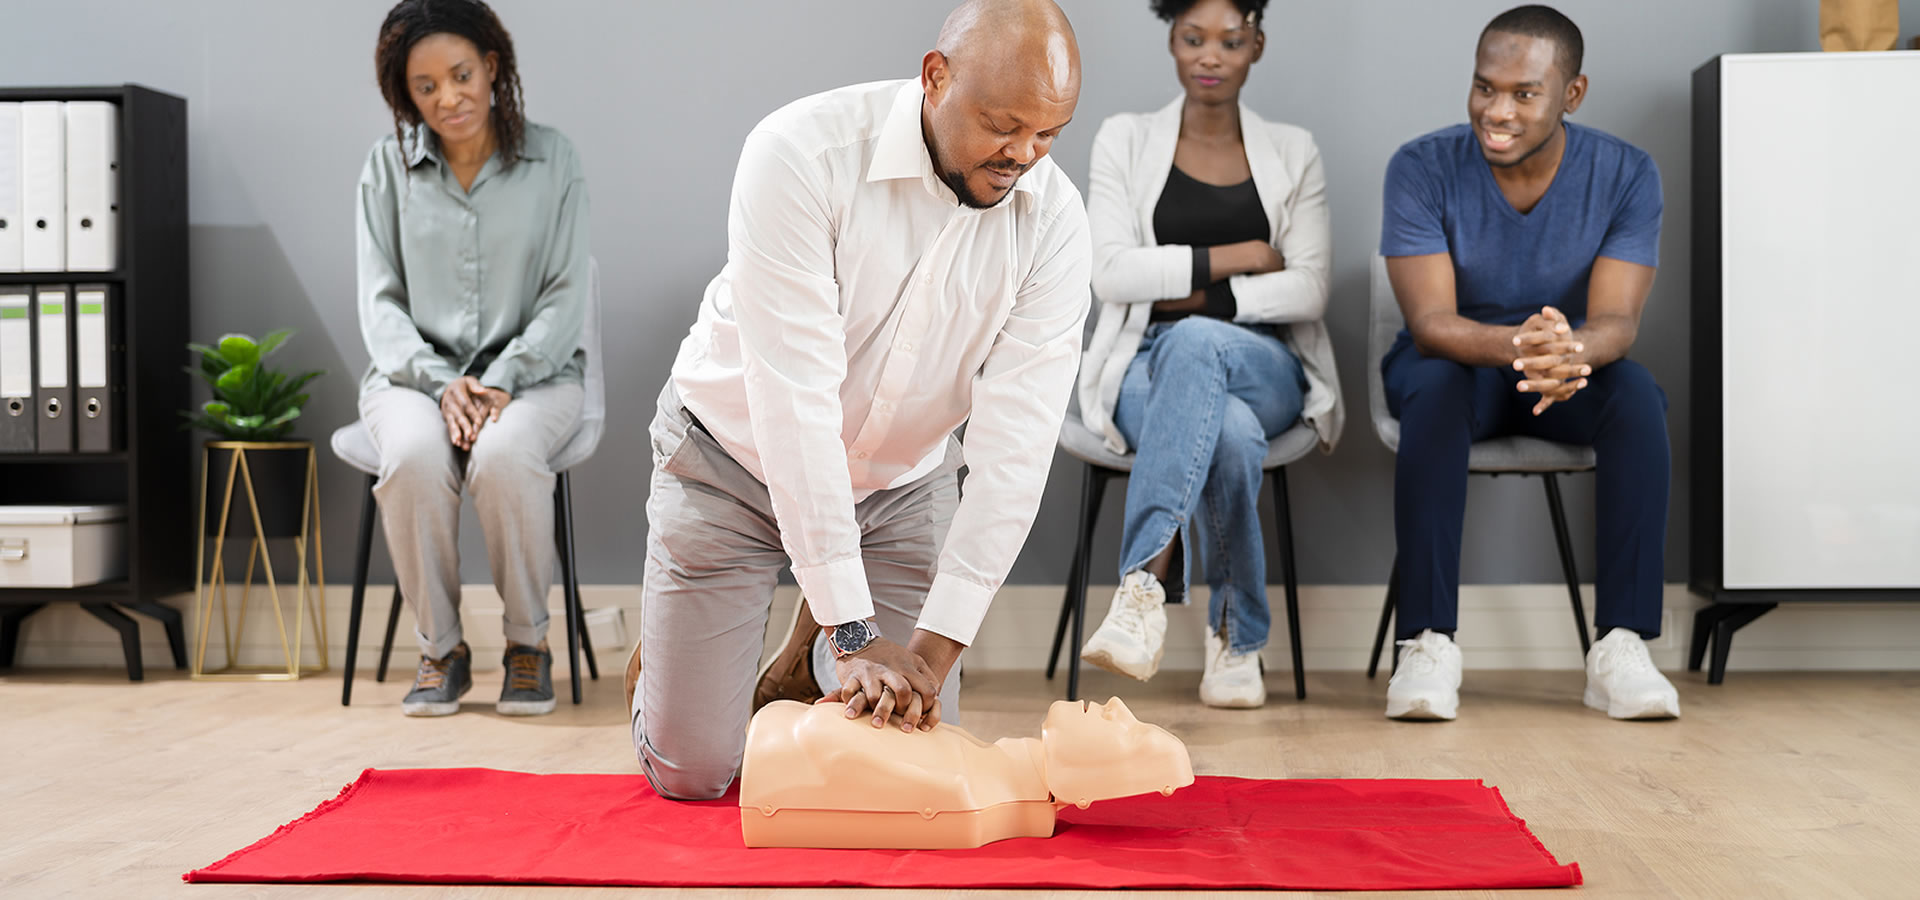 The Beginner’s Guide to CPR and AED